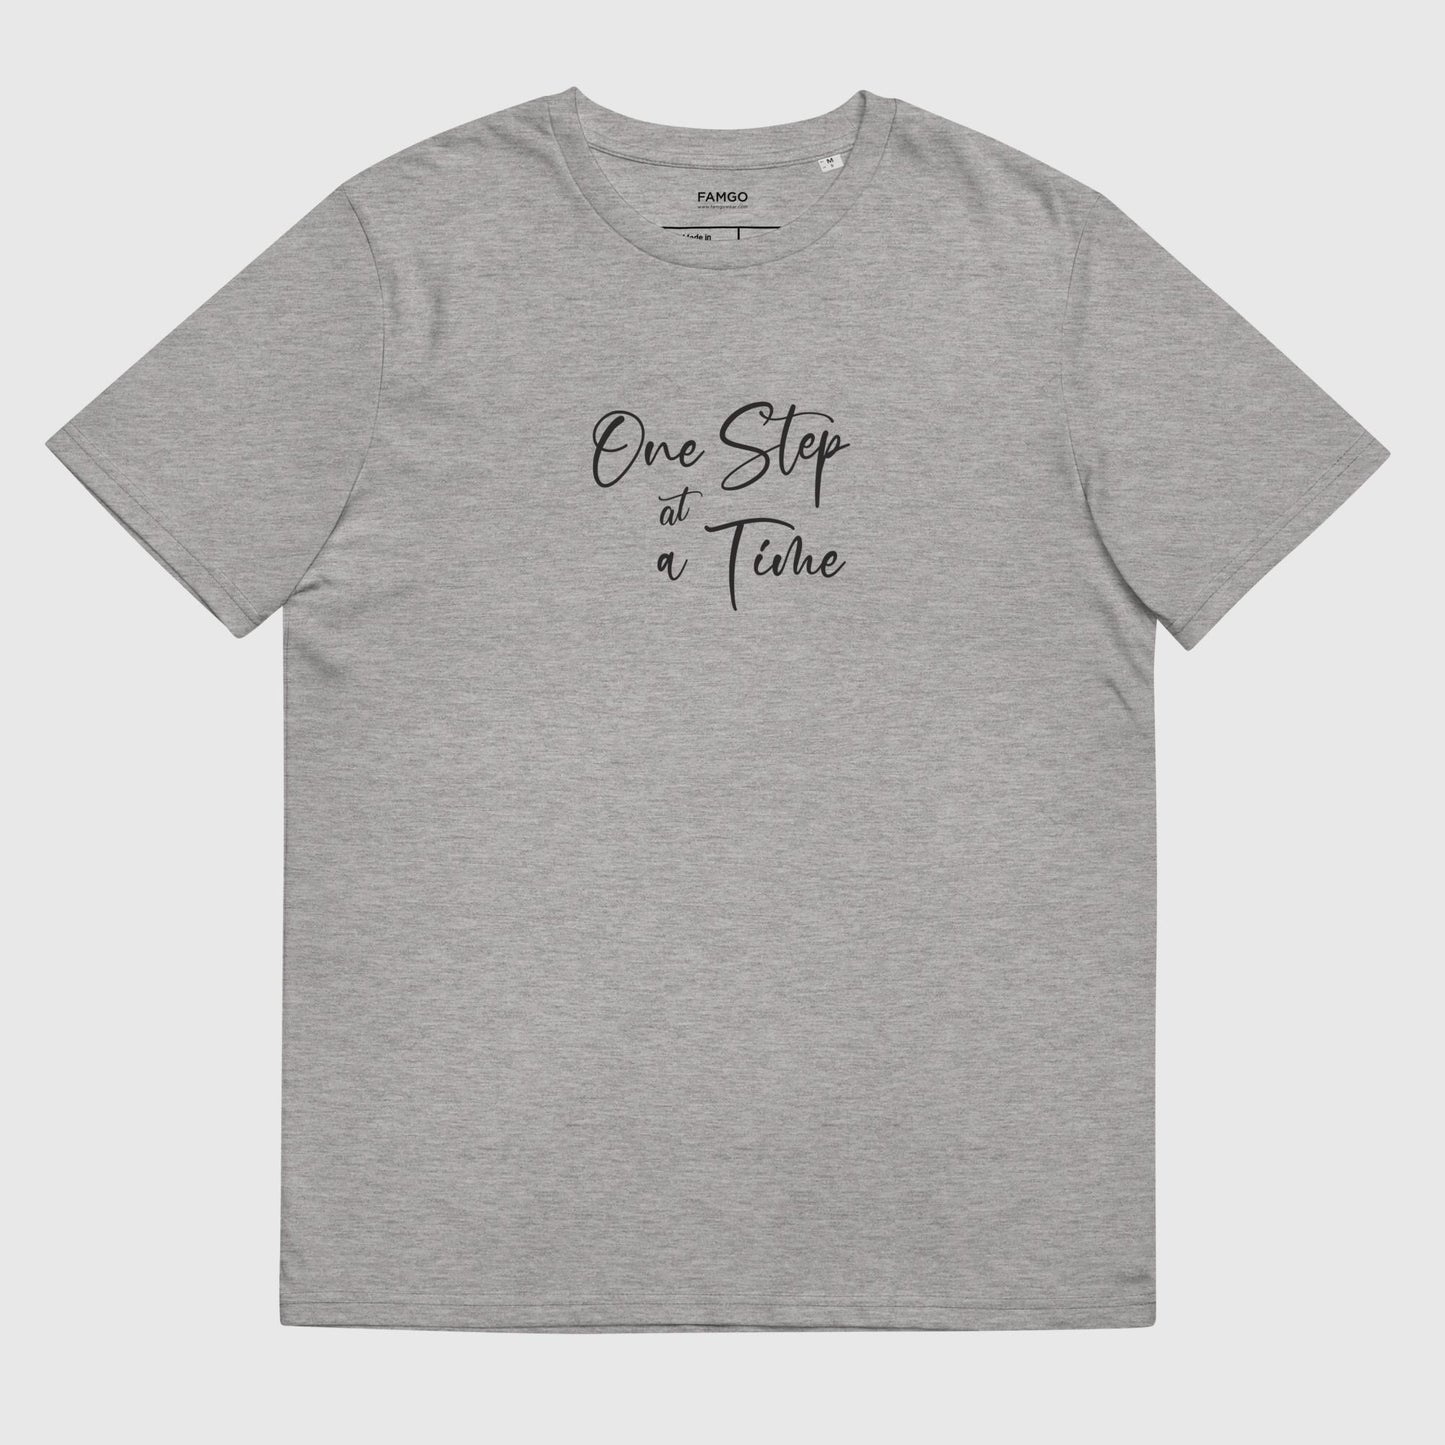 Men's heather gray organic cotton t-shirt that features the positive saying, "One Step At A Time."